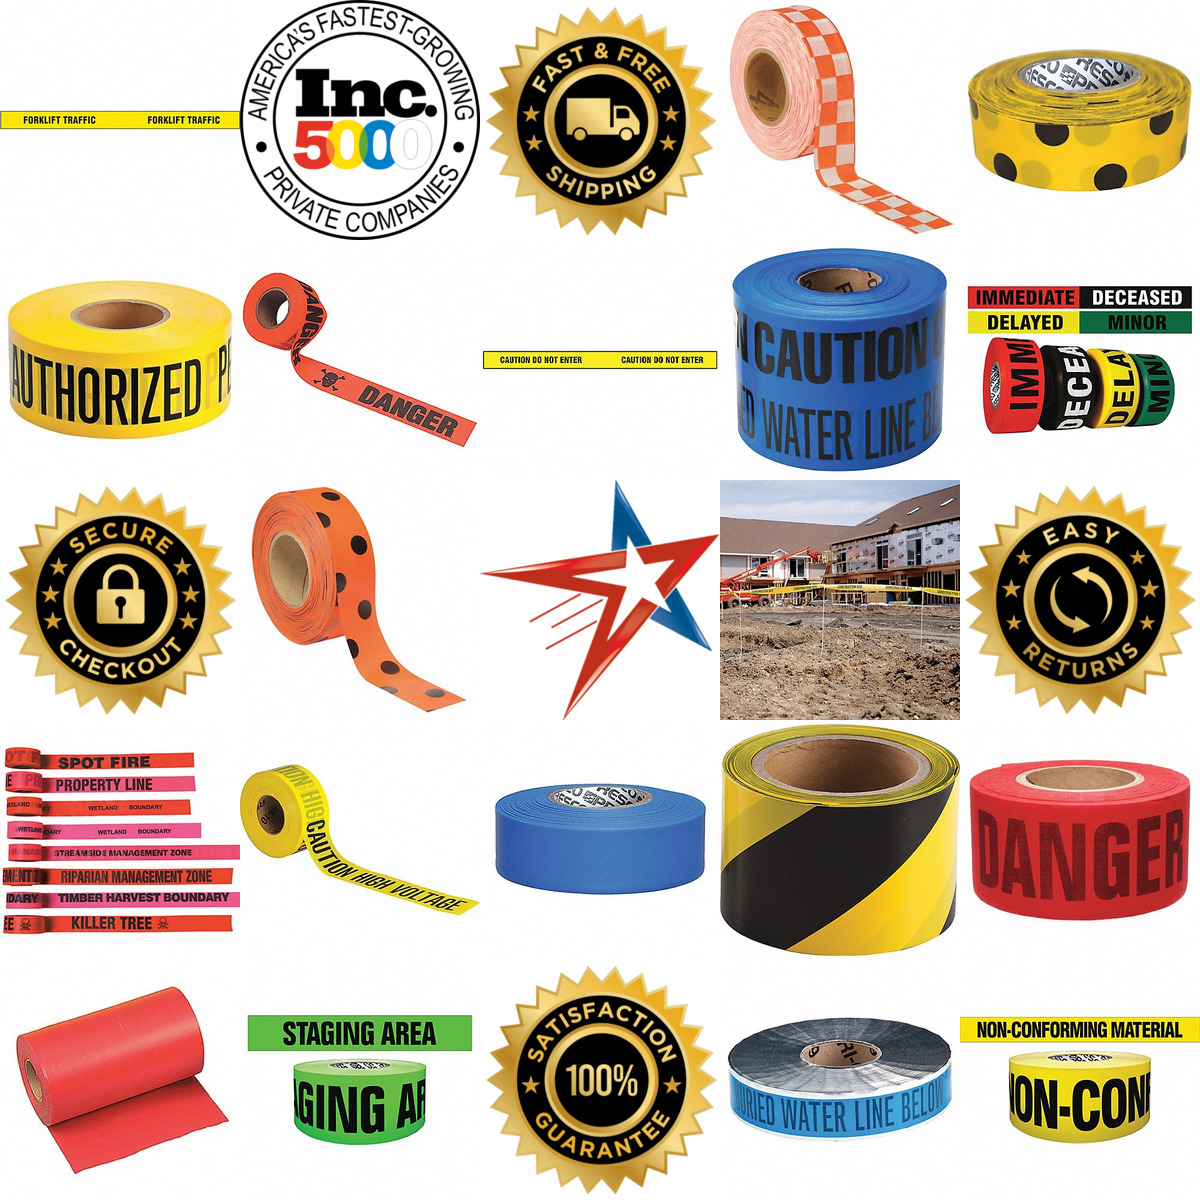 A selection of Barrier Flagging and Underground Tapes products on GoVets